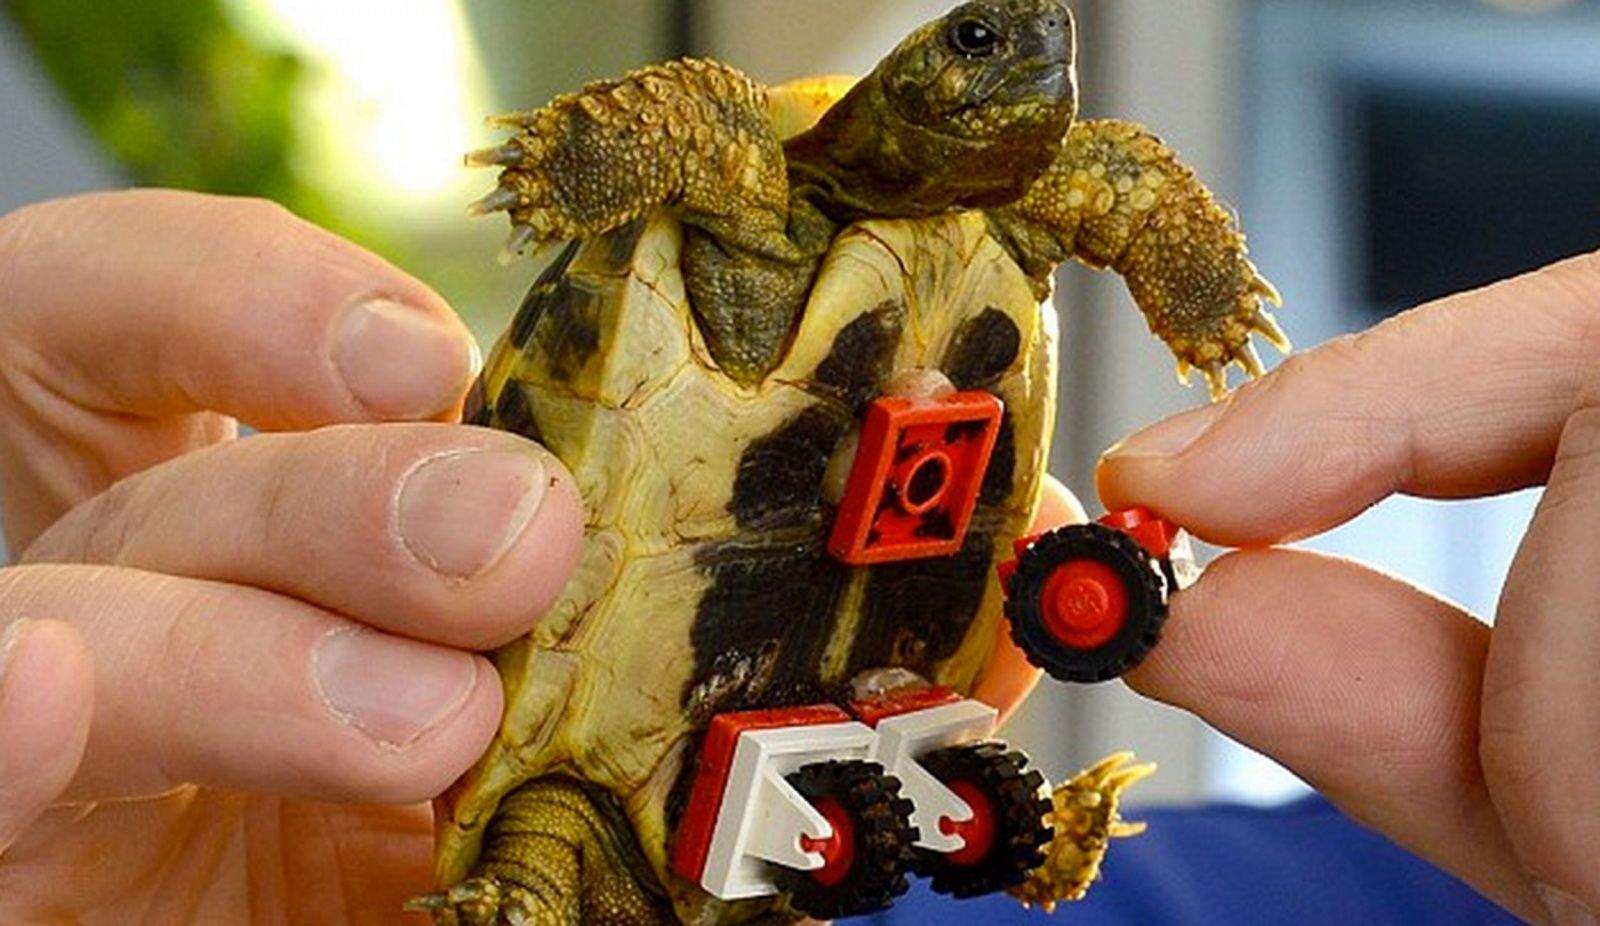 Lego wheels glued on the belly of this tortoise helps him move while he recovers from muscle weakness. Photo by Action Press/Rex